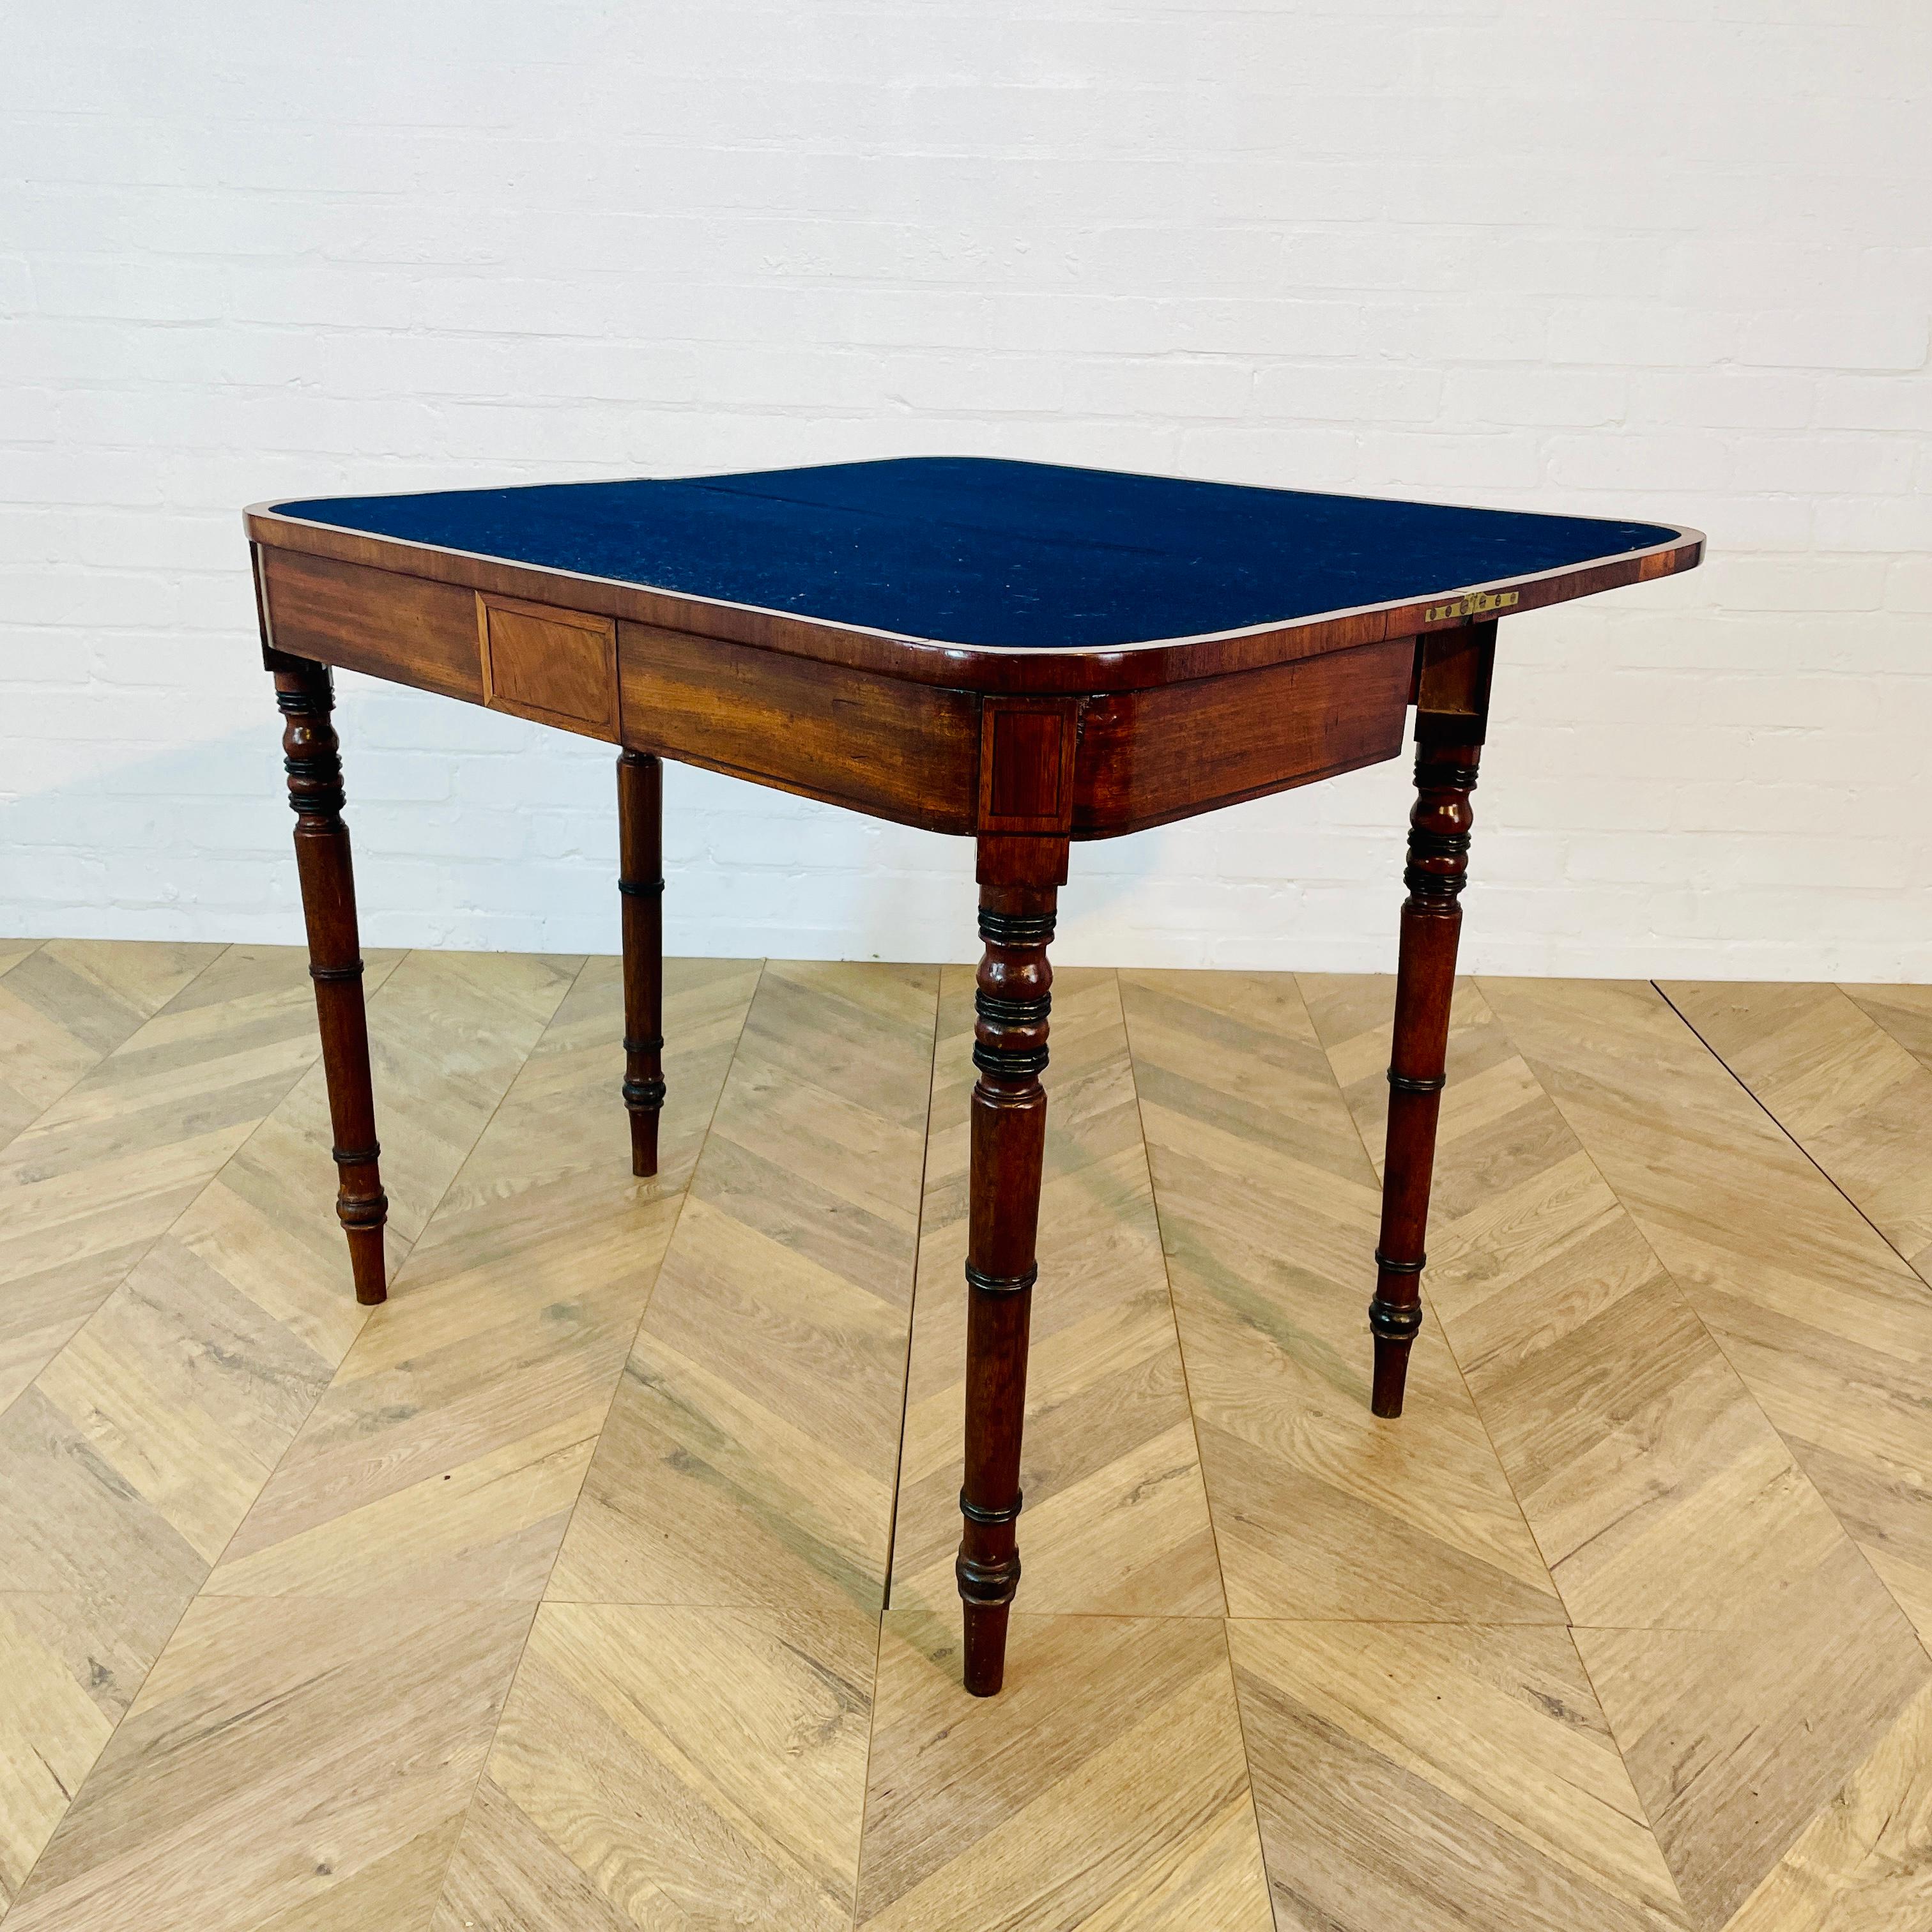 A Lovely English Antique Foldout Card Table, Victorian Period circa 1880s.

The table, made from mahogany and structurally very strong, with lovely inlaid delays.

The table has a warm patina, but does show a small amount of wear to the table, but